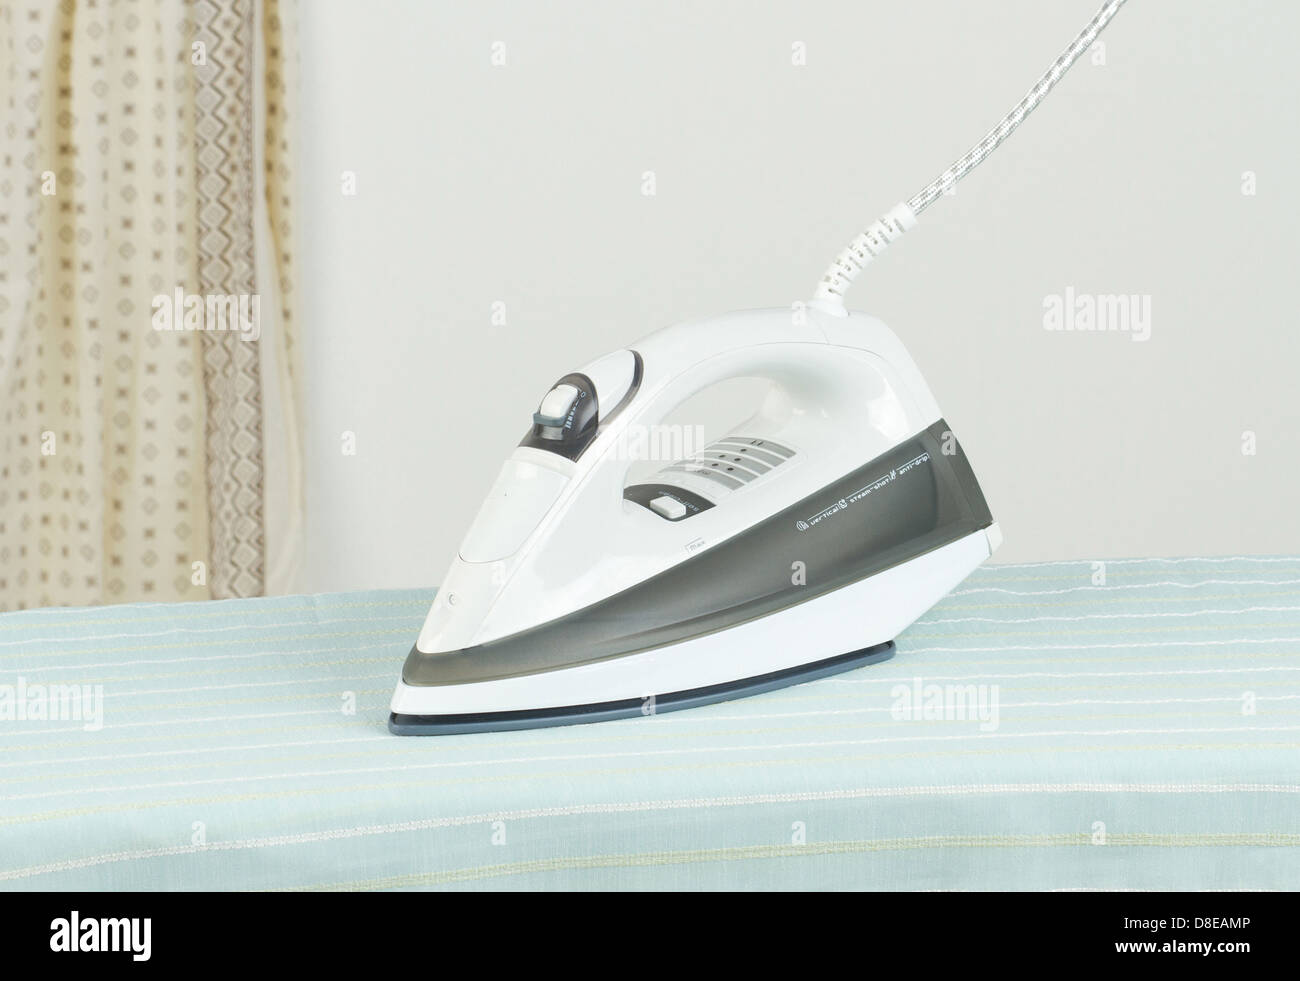 Modern steam iron the new technology for ironing Stock Photo